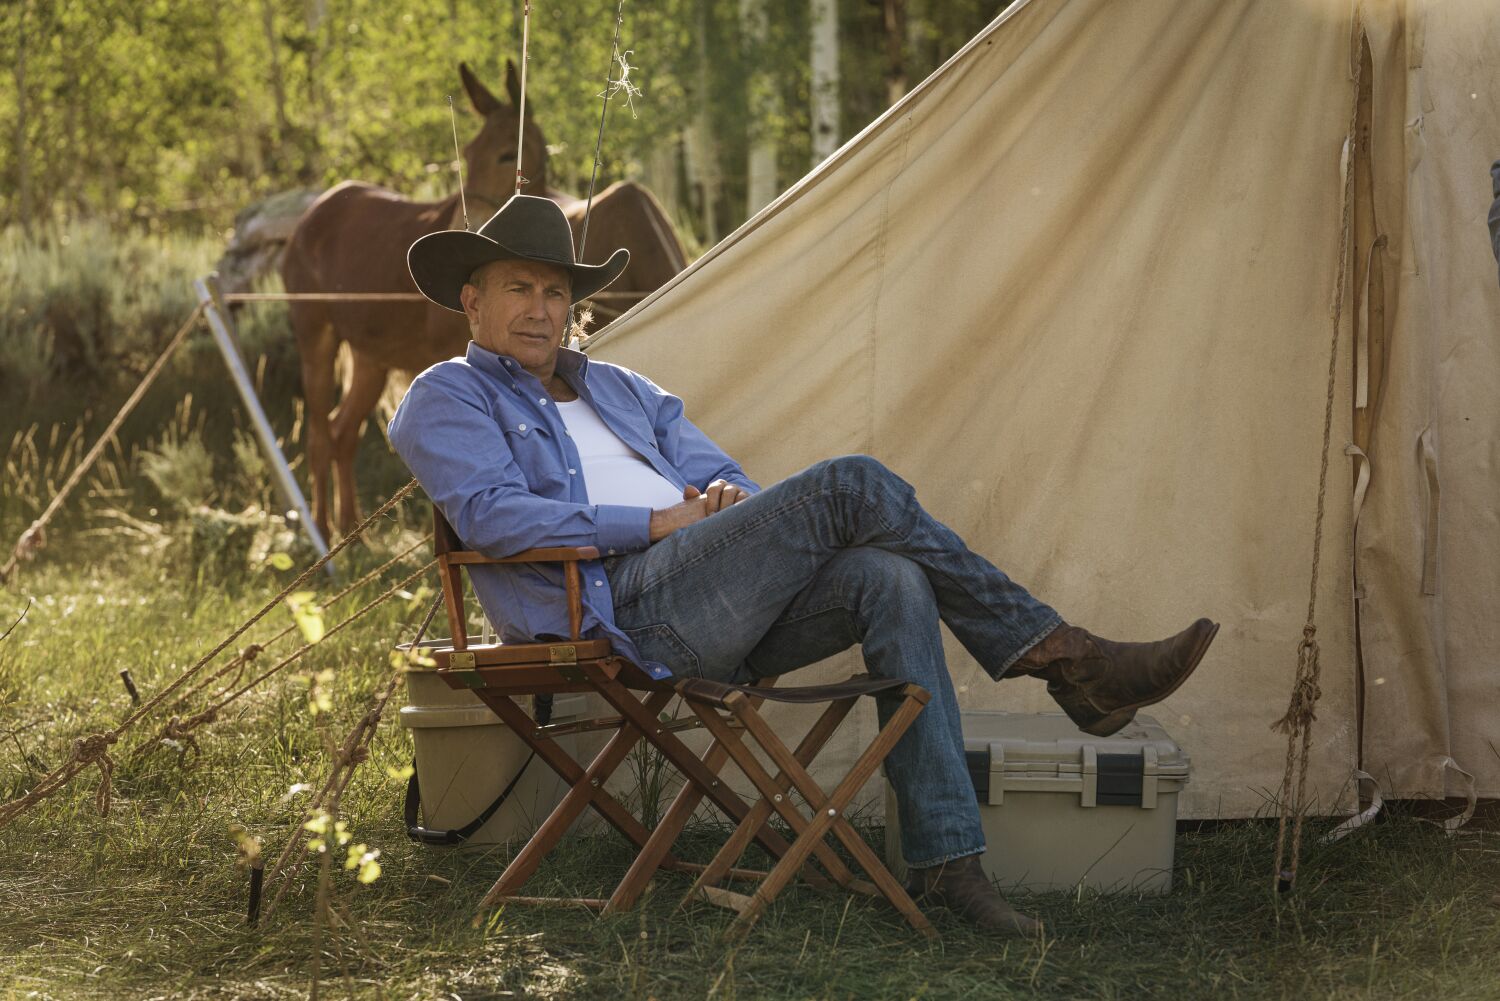 'An absolute lie': Kevin Costner's lawyer denies 'Yellowstone' production rumors